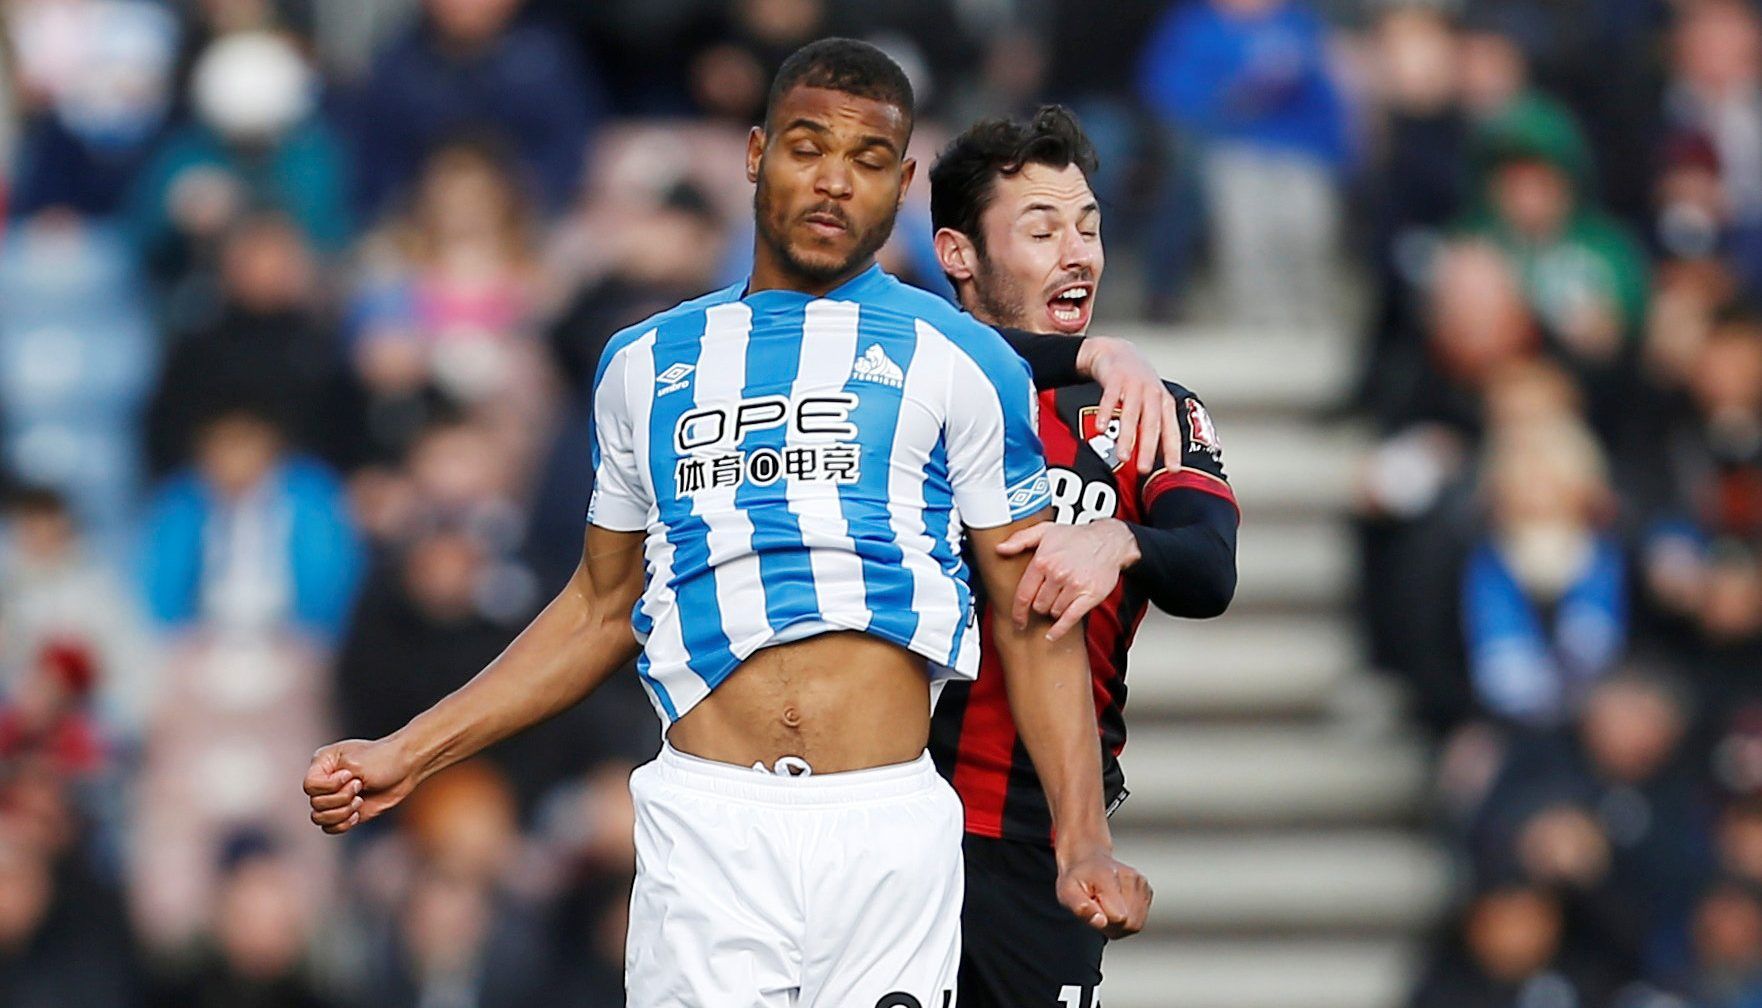 Soccer Football - Premier League - Huddersfield Town v AFC Bournemouth - John Smith's Stadium, Huddersfield, Britain - March 9, 2019  Huddersfield Town's Steve Mounie in action with Bournemouth's Adam Smith      Action Images via Reuters/Craig Brough  EDITORIAL USE ONLY. No use with unauthorized audio, video, data, fixture lists, club/league logos or 